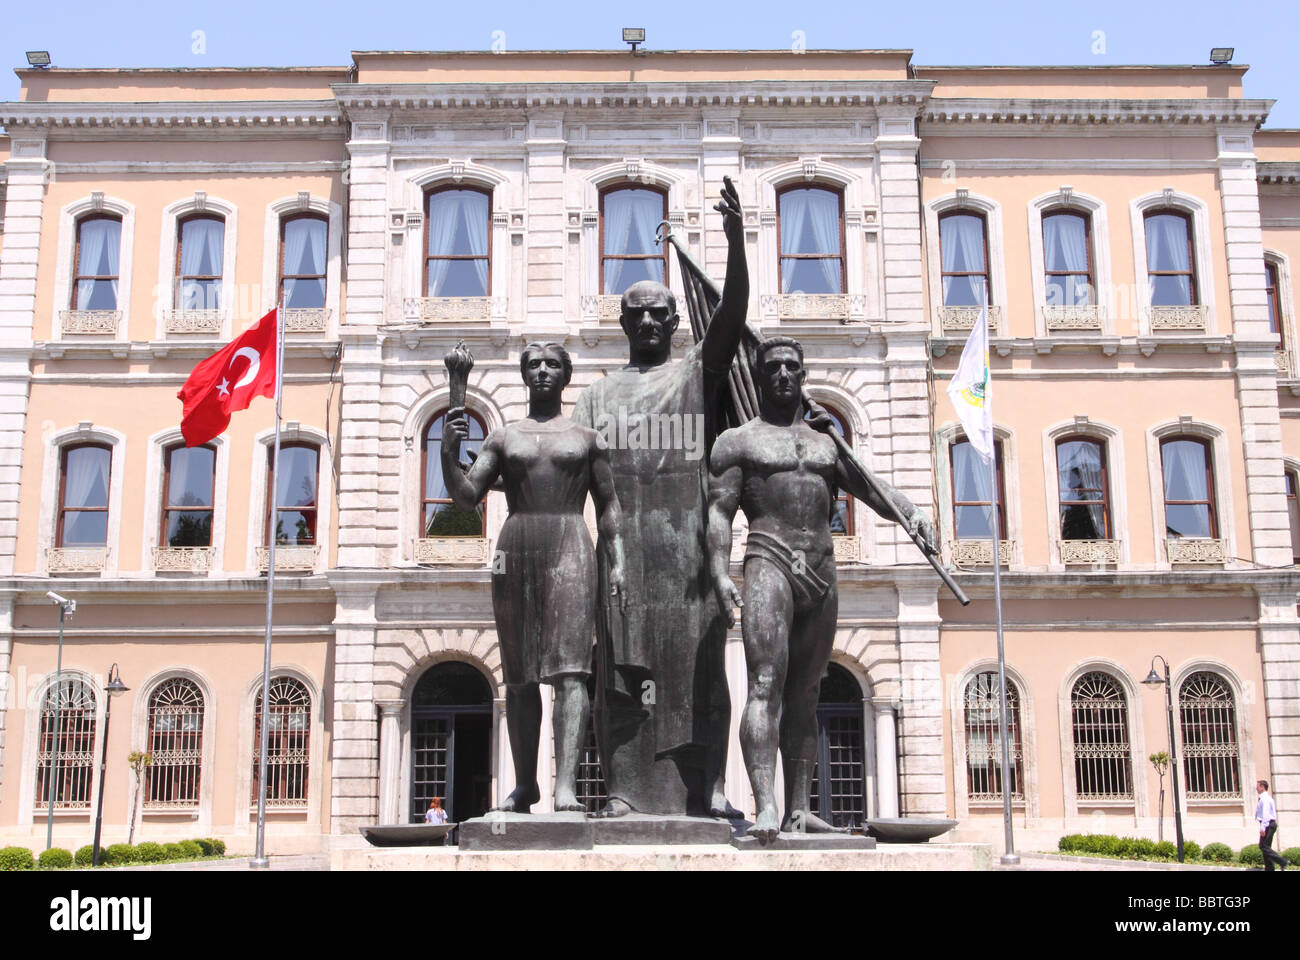 Istanbul Turkey the Istanbul University campus with statue of Ataturk and Turkish flag in the Beyazit area of the city Stock Photo